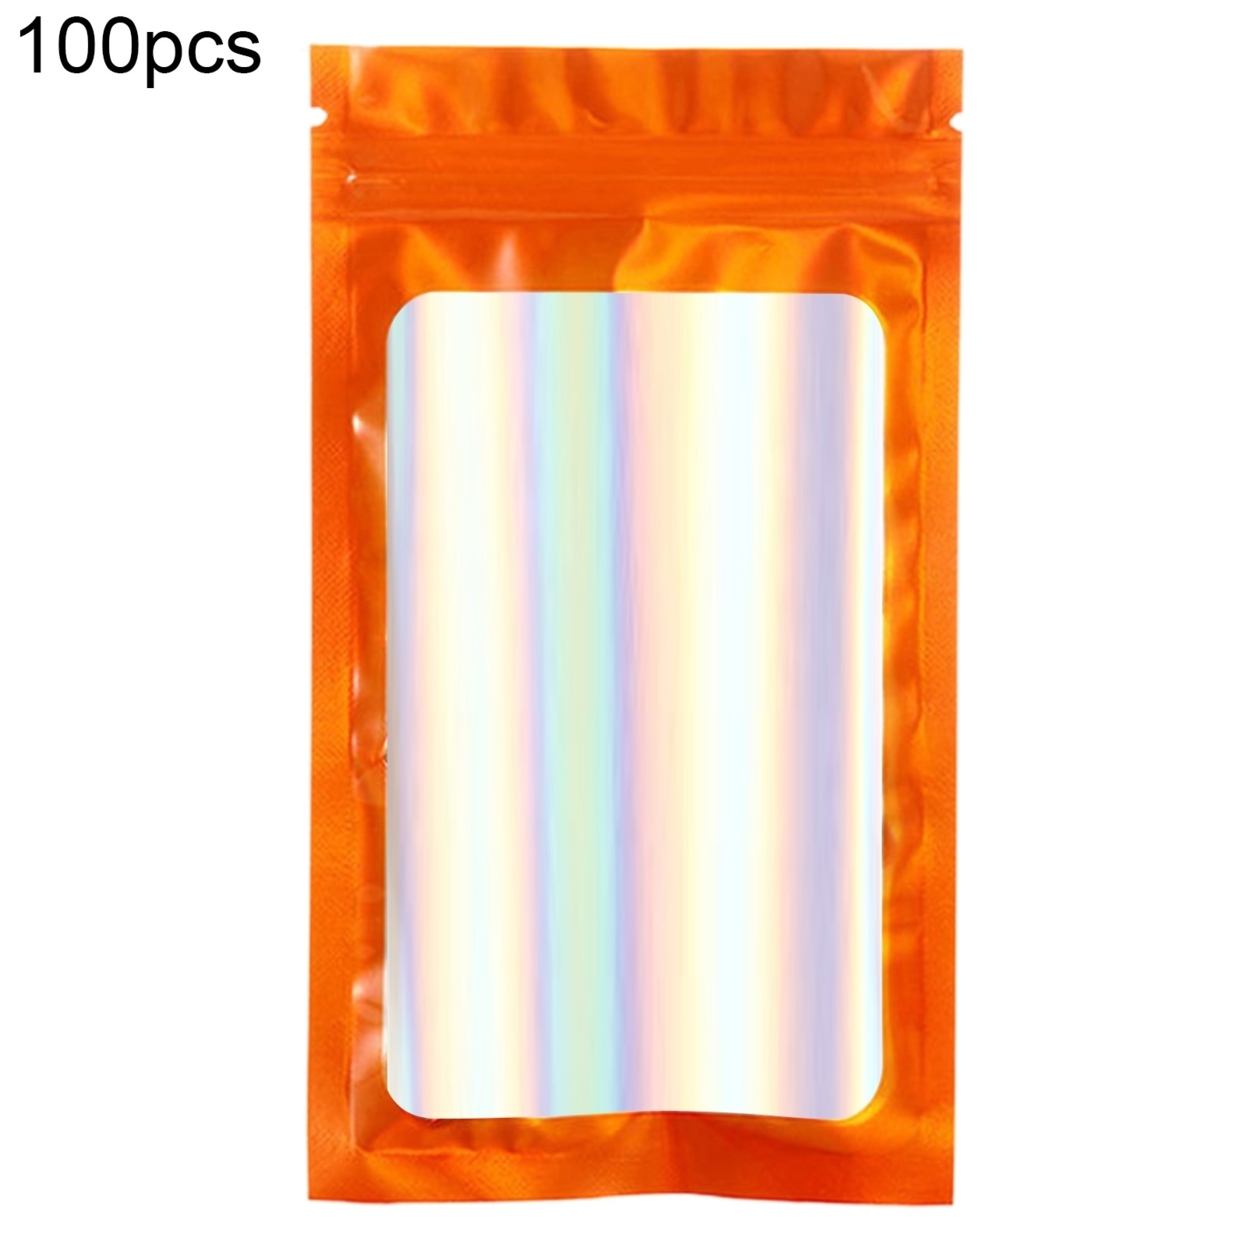 100Pcs/Set Zip-lock Bags Eye-catching Odor Proof Holographic Color Cosmetic Laser Packaging Bags for Kitchen - orange, 10*18cm